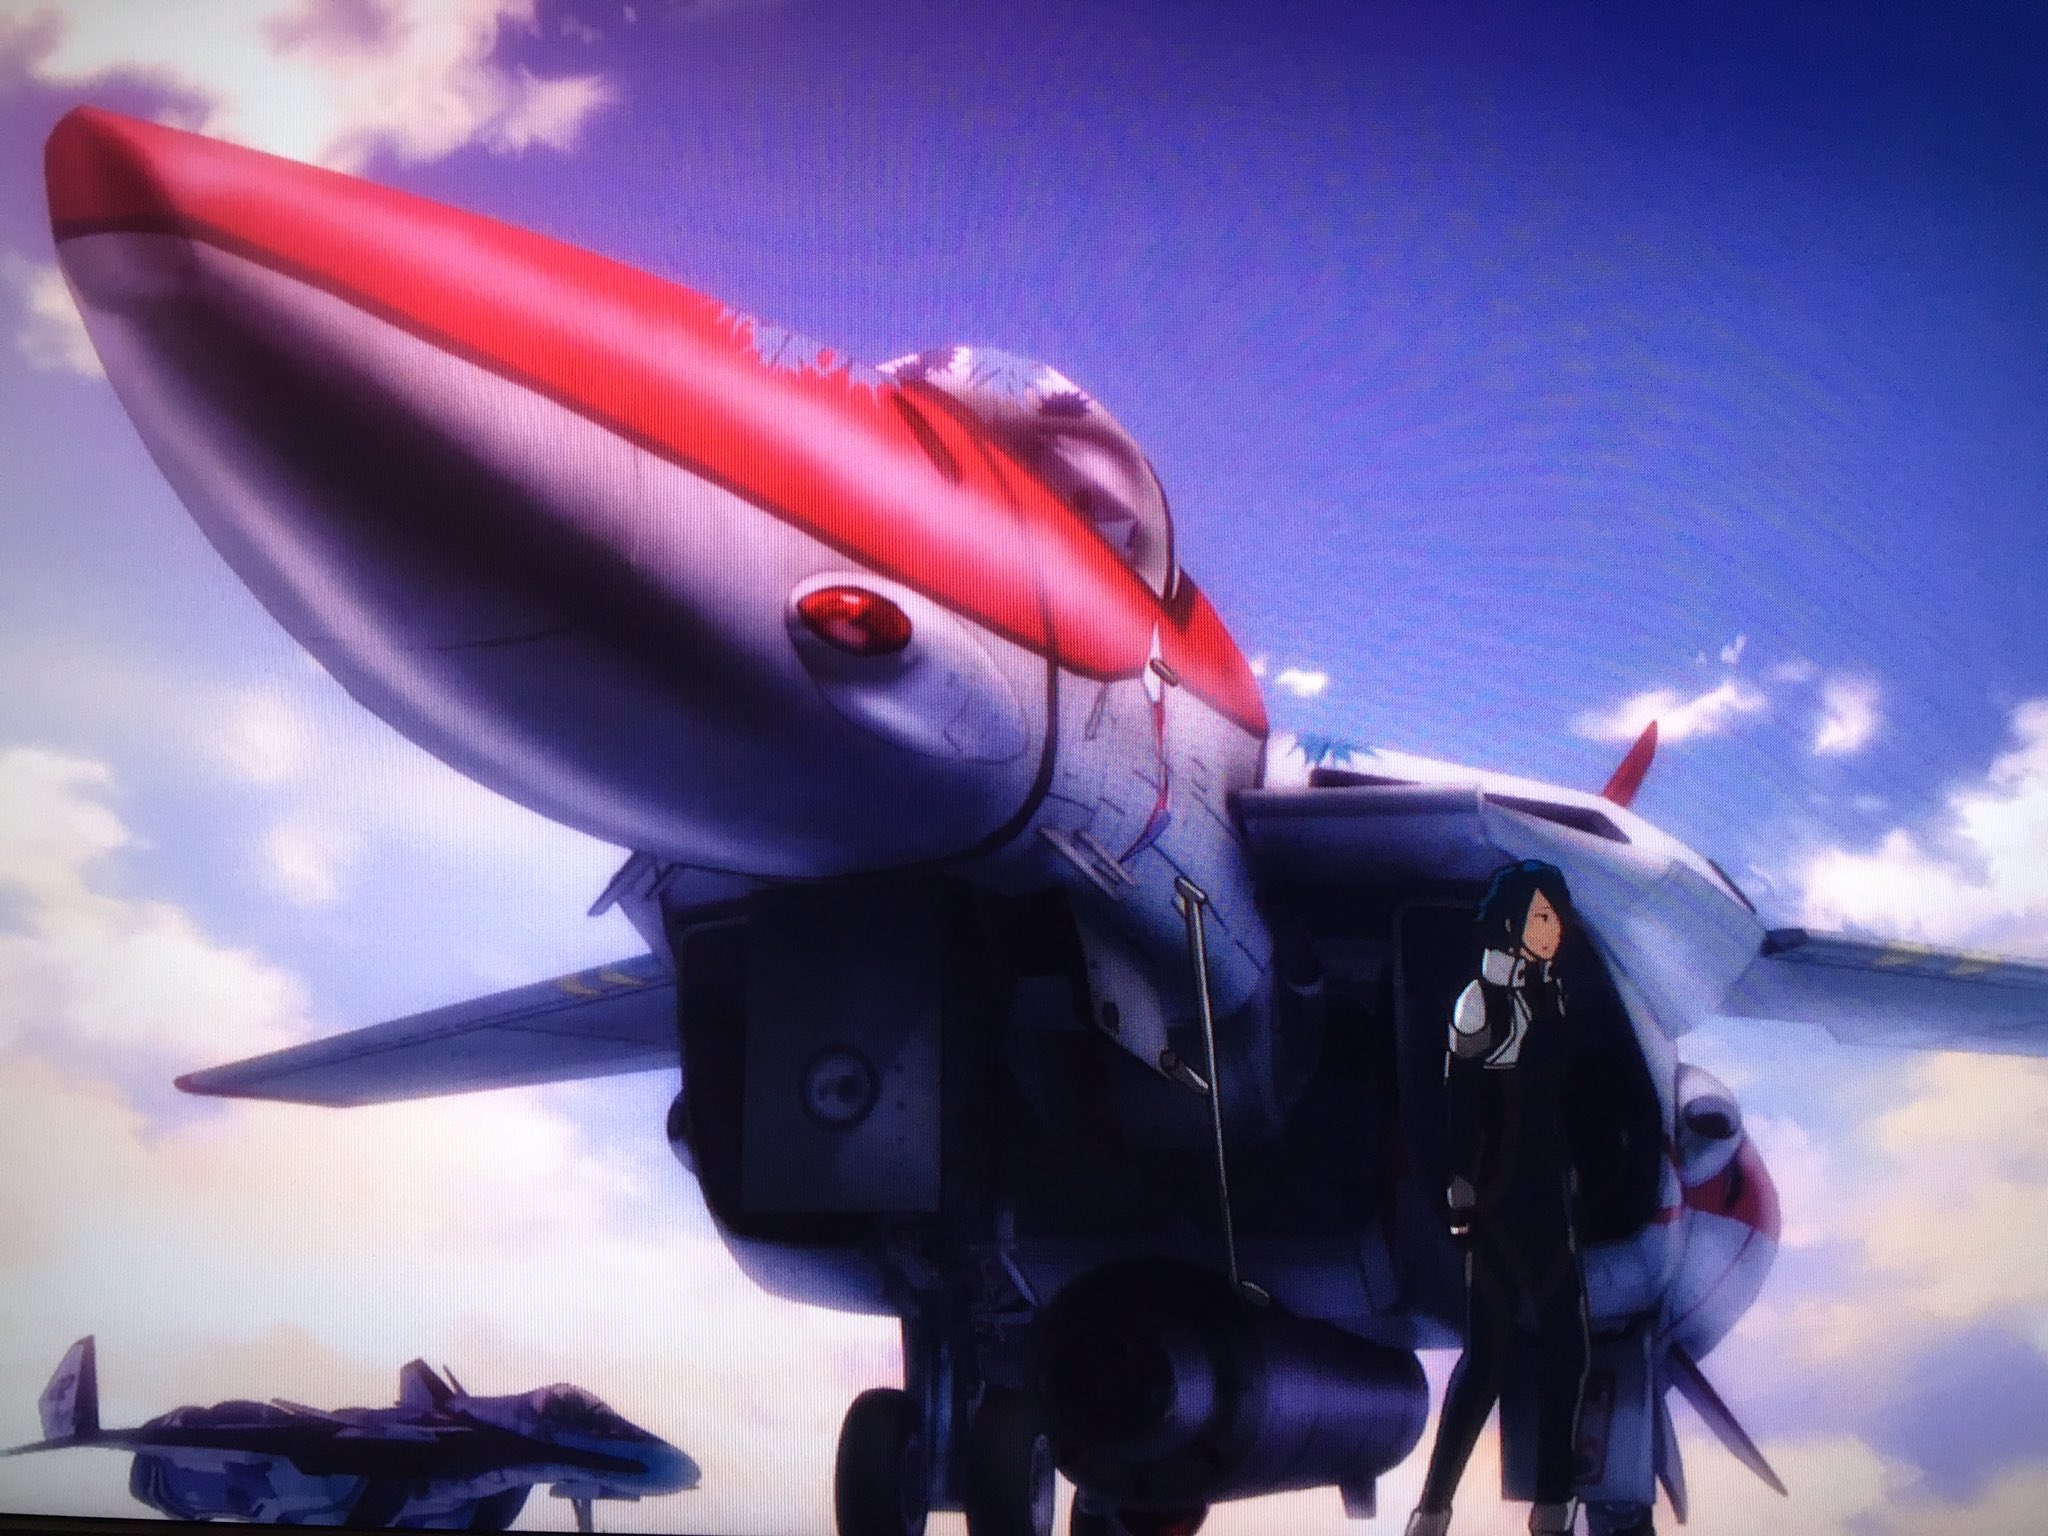 Gwyn Campbell ペングウィン How Retro Cool Isthe Vf 1ex A Trainer The Cockpit Is Full Hi Tec But The Shape Is Oldskool Macross Macrossdelta